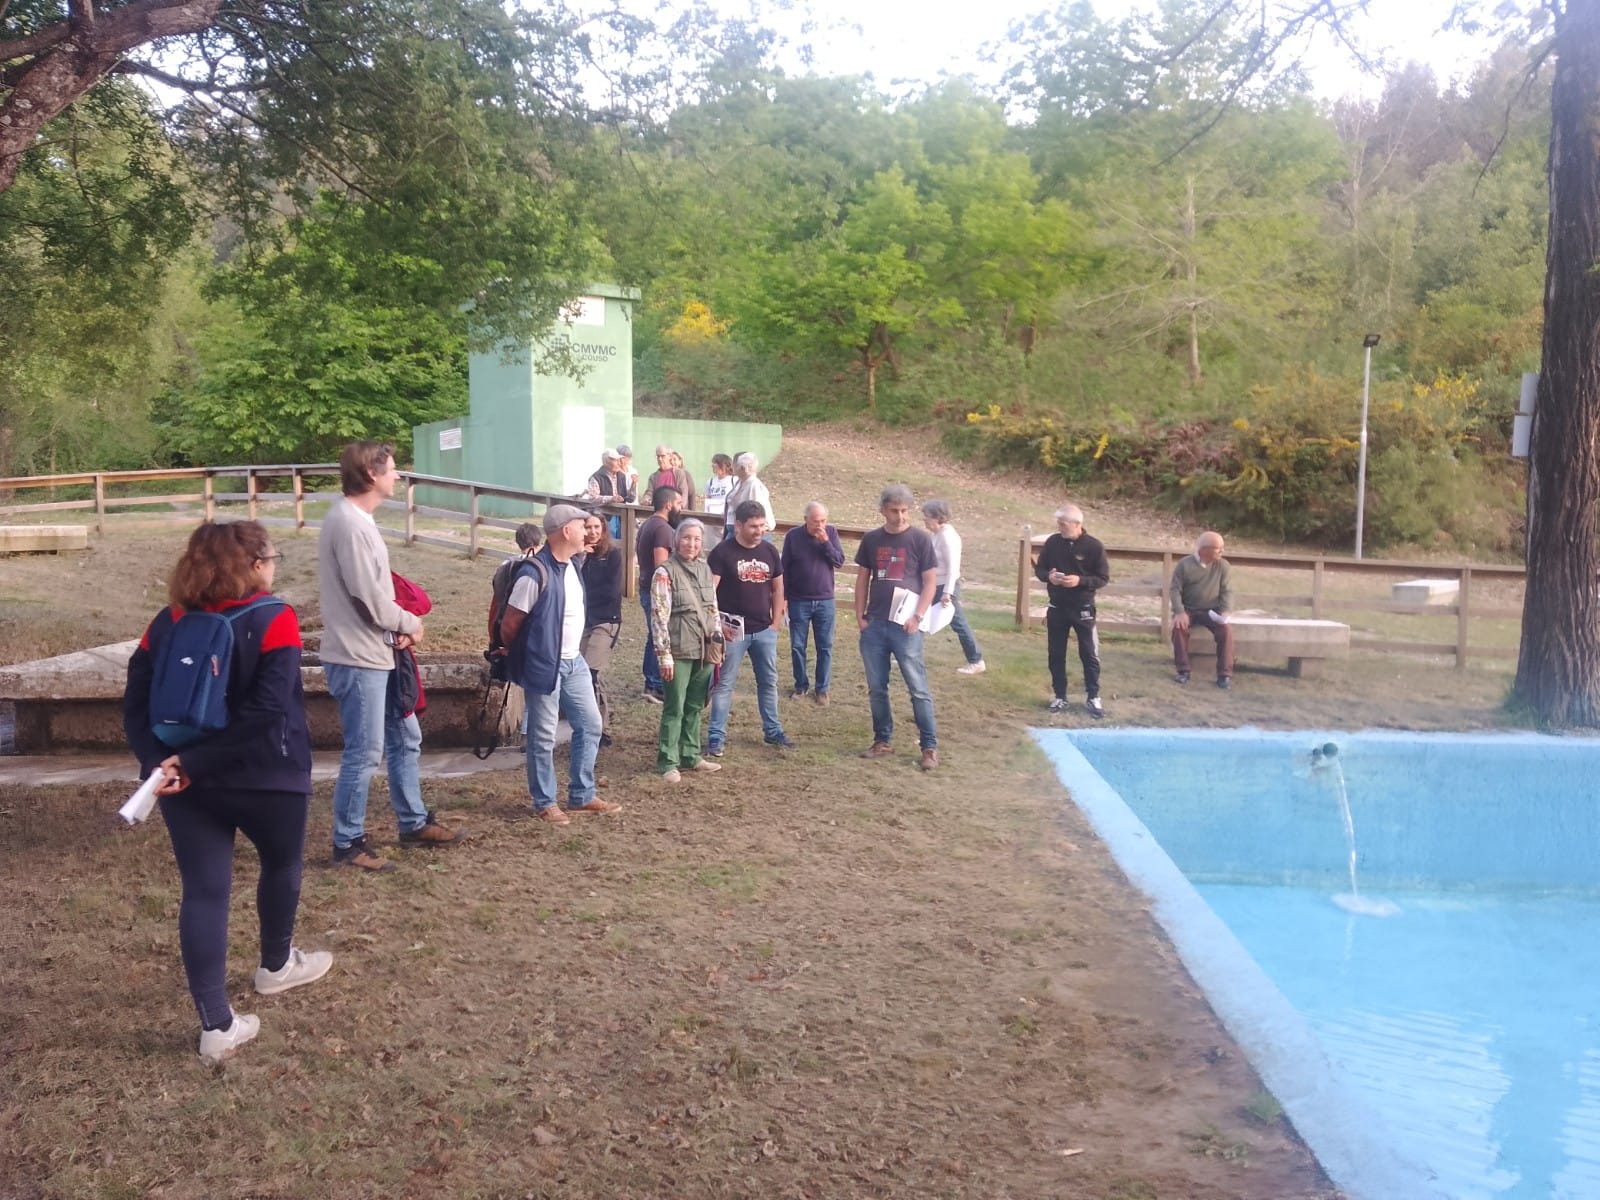 The group chats and reflects on the Montes de Couso bathing area. / Photo courtesy of the mediator